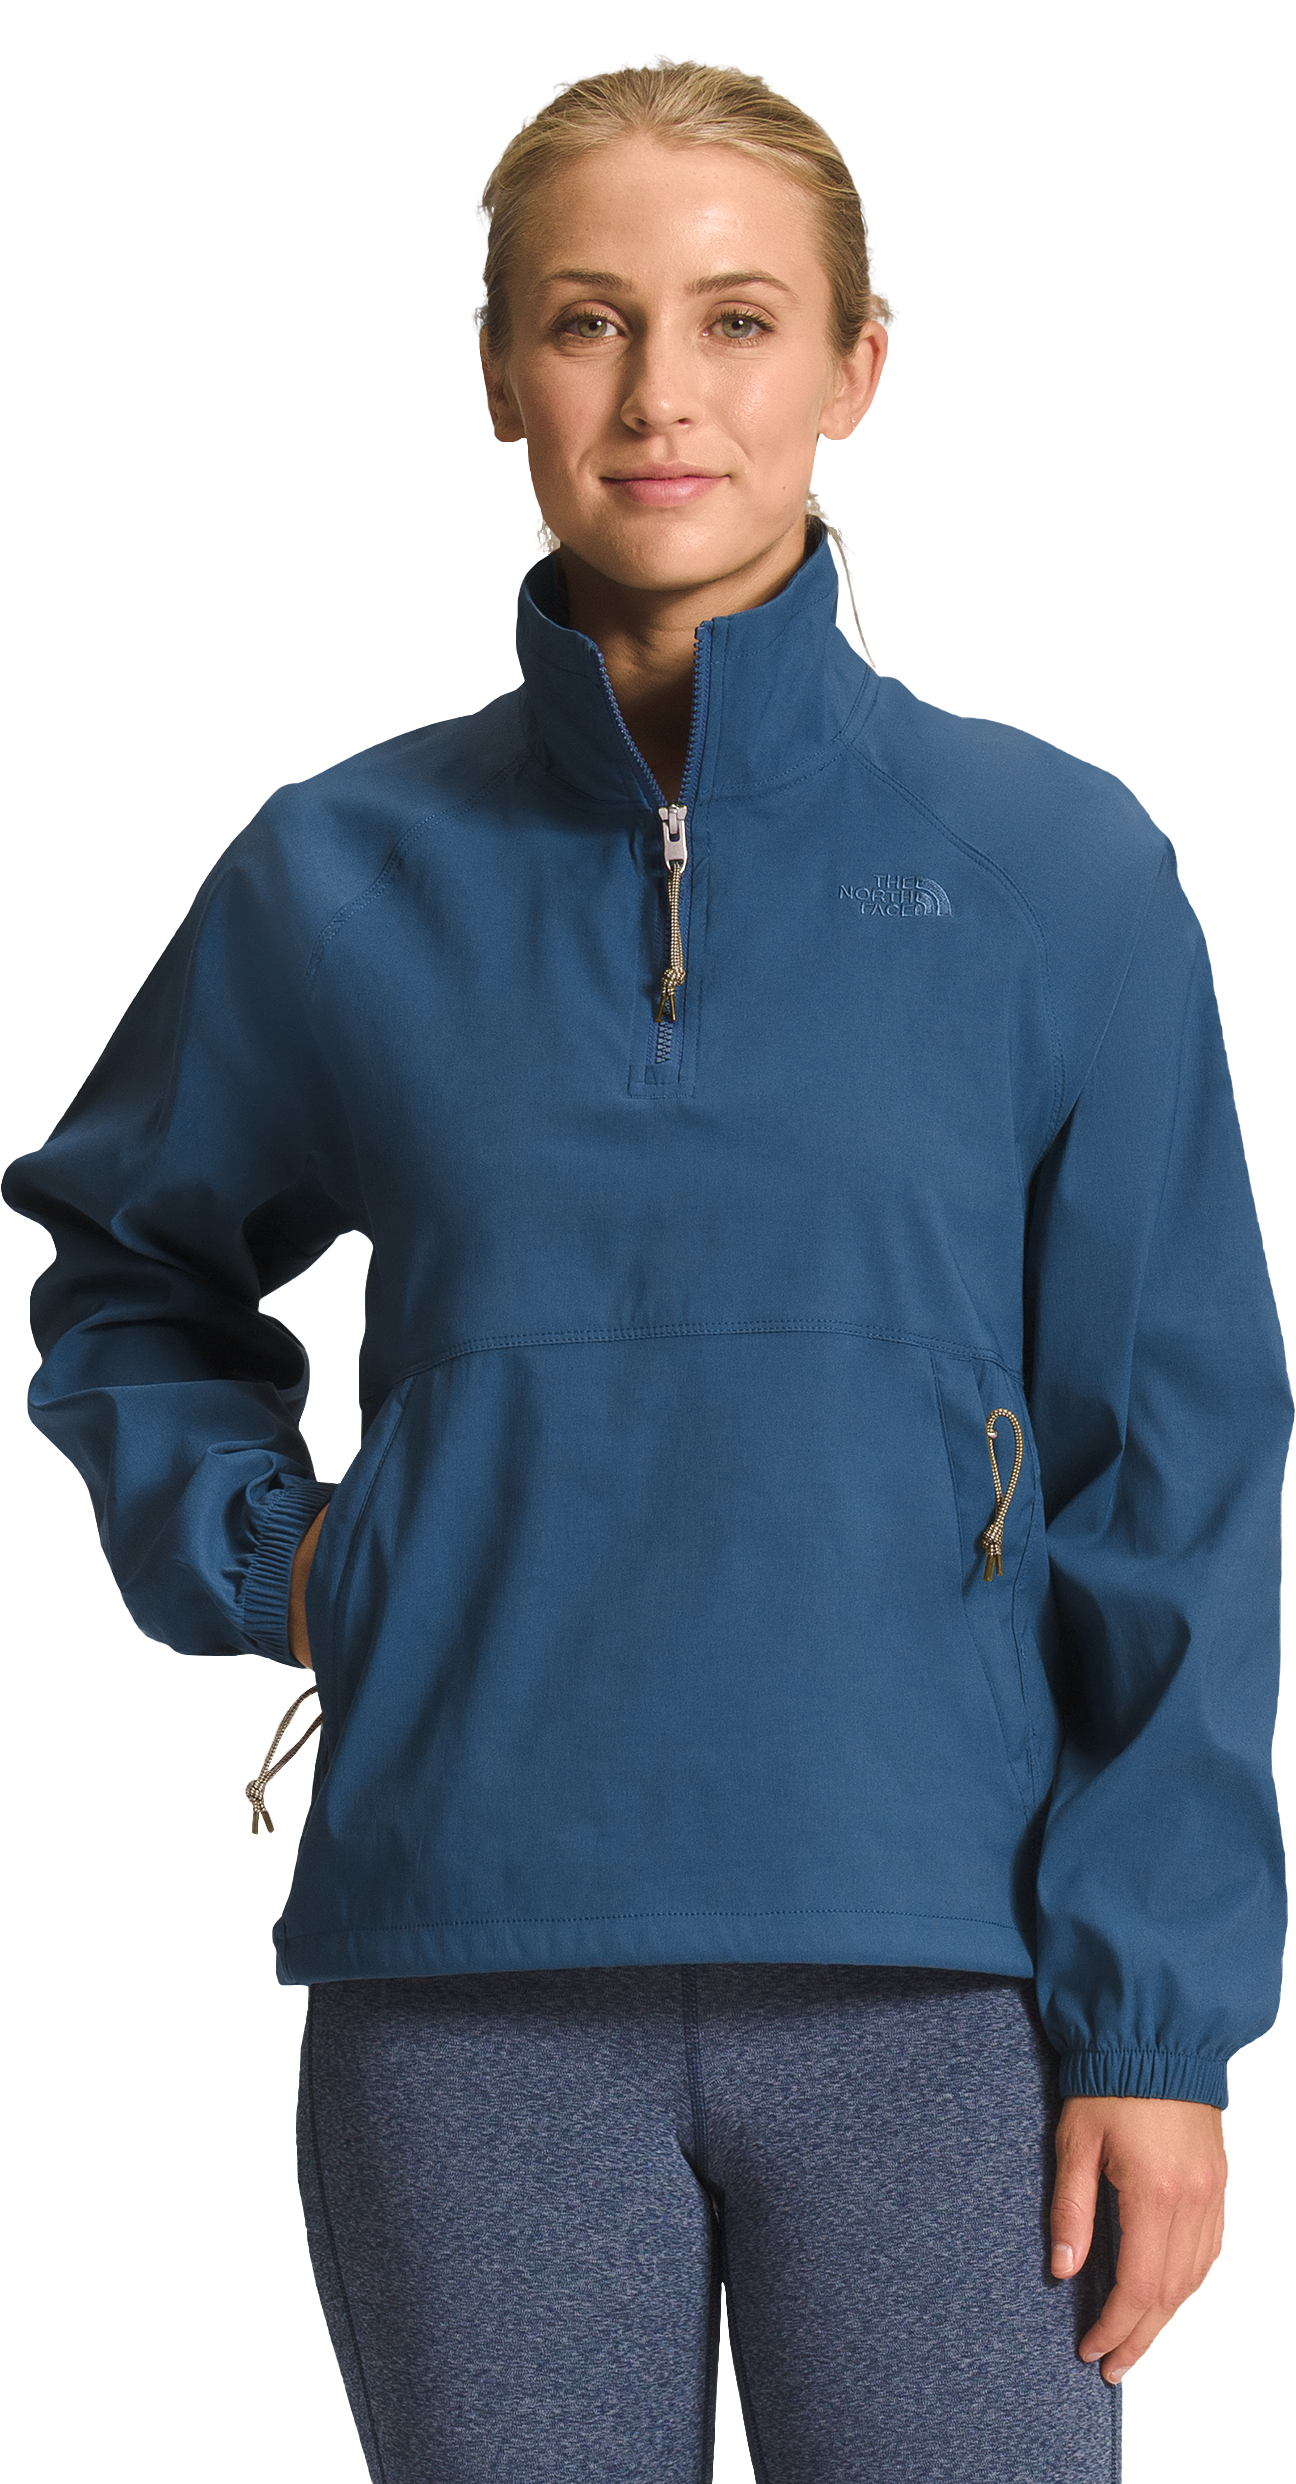 The North Face Class V Pullover Jacket for Ladies - Shady Blue - M